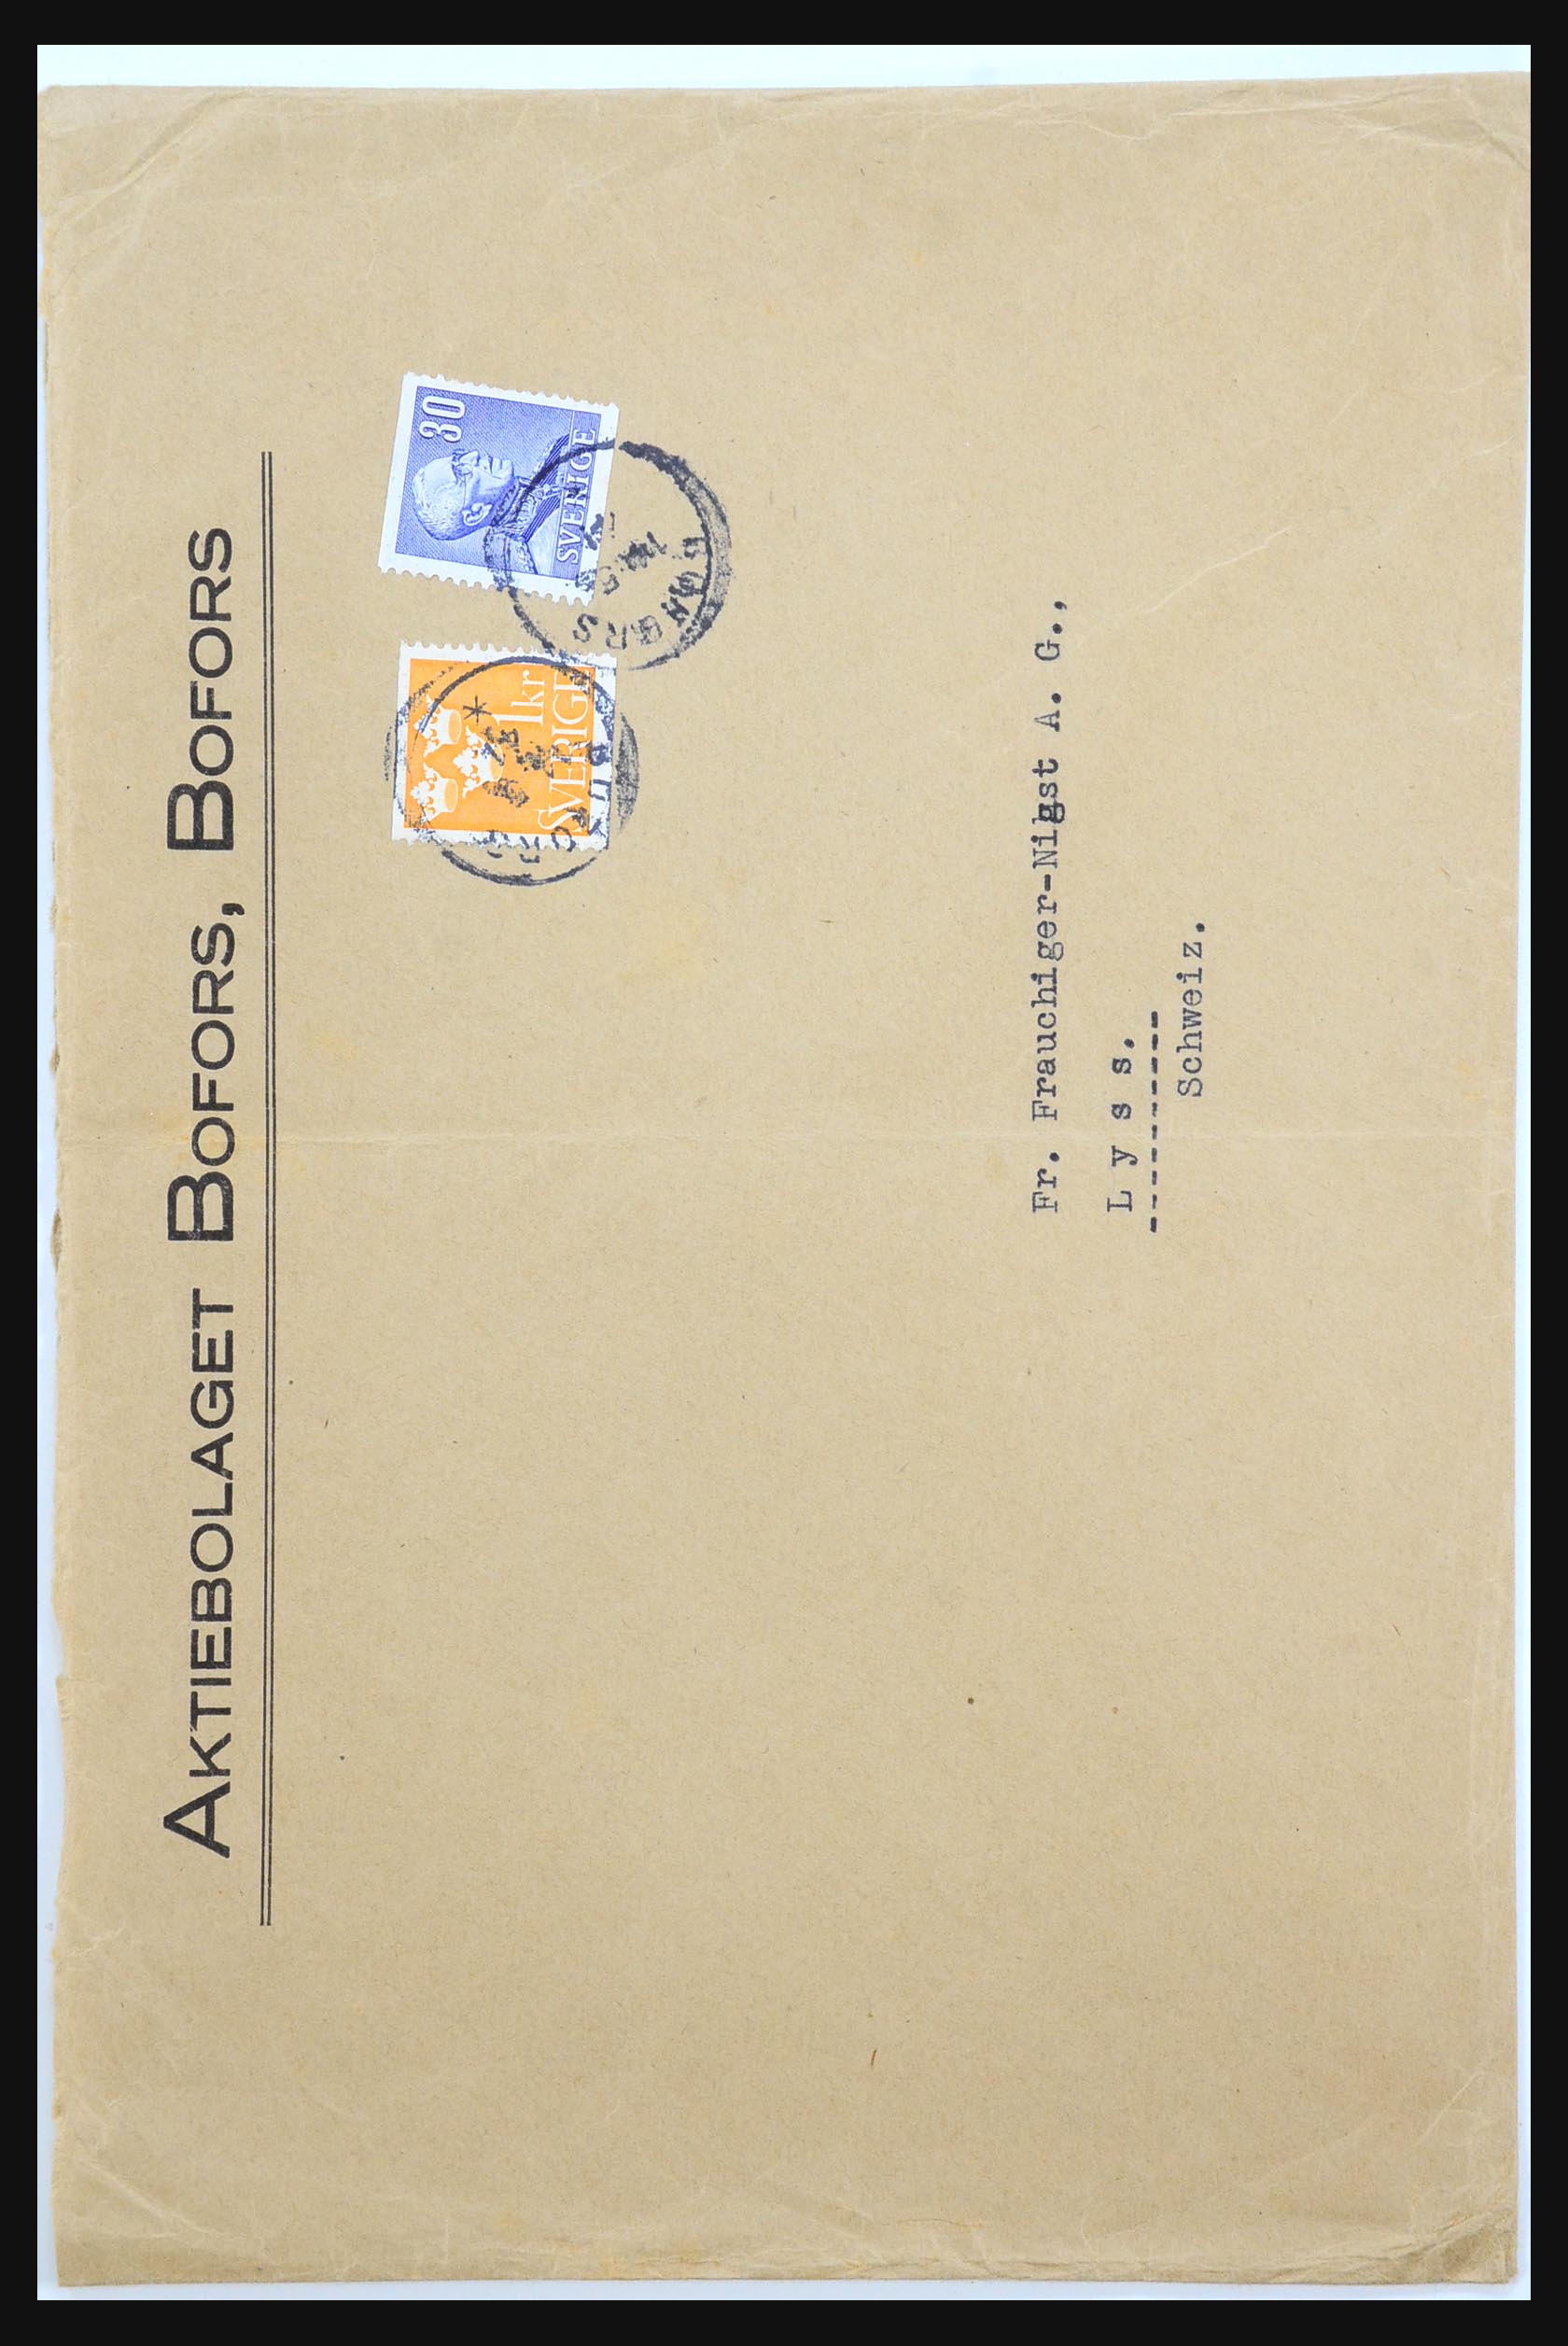 31364 079 - 31364 Sweden covers 1864-1960.